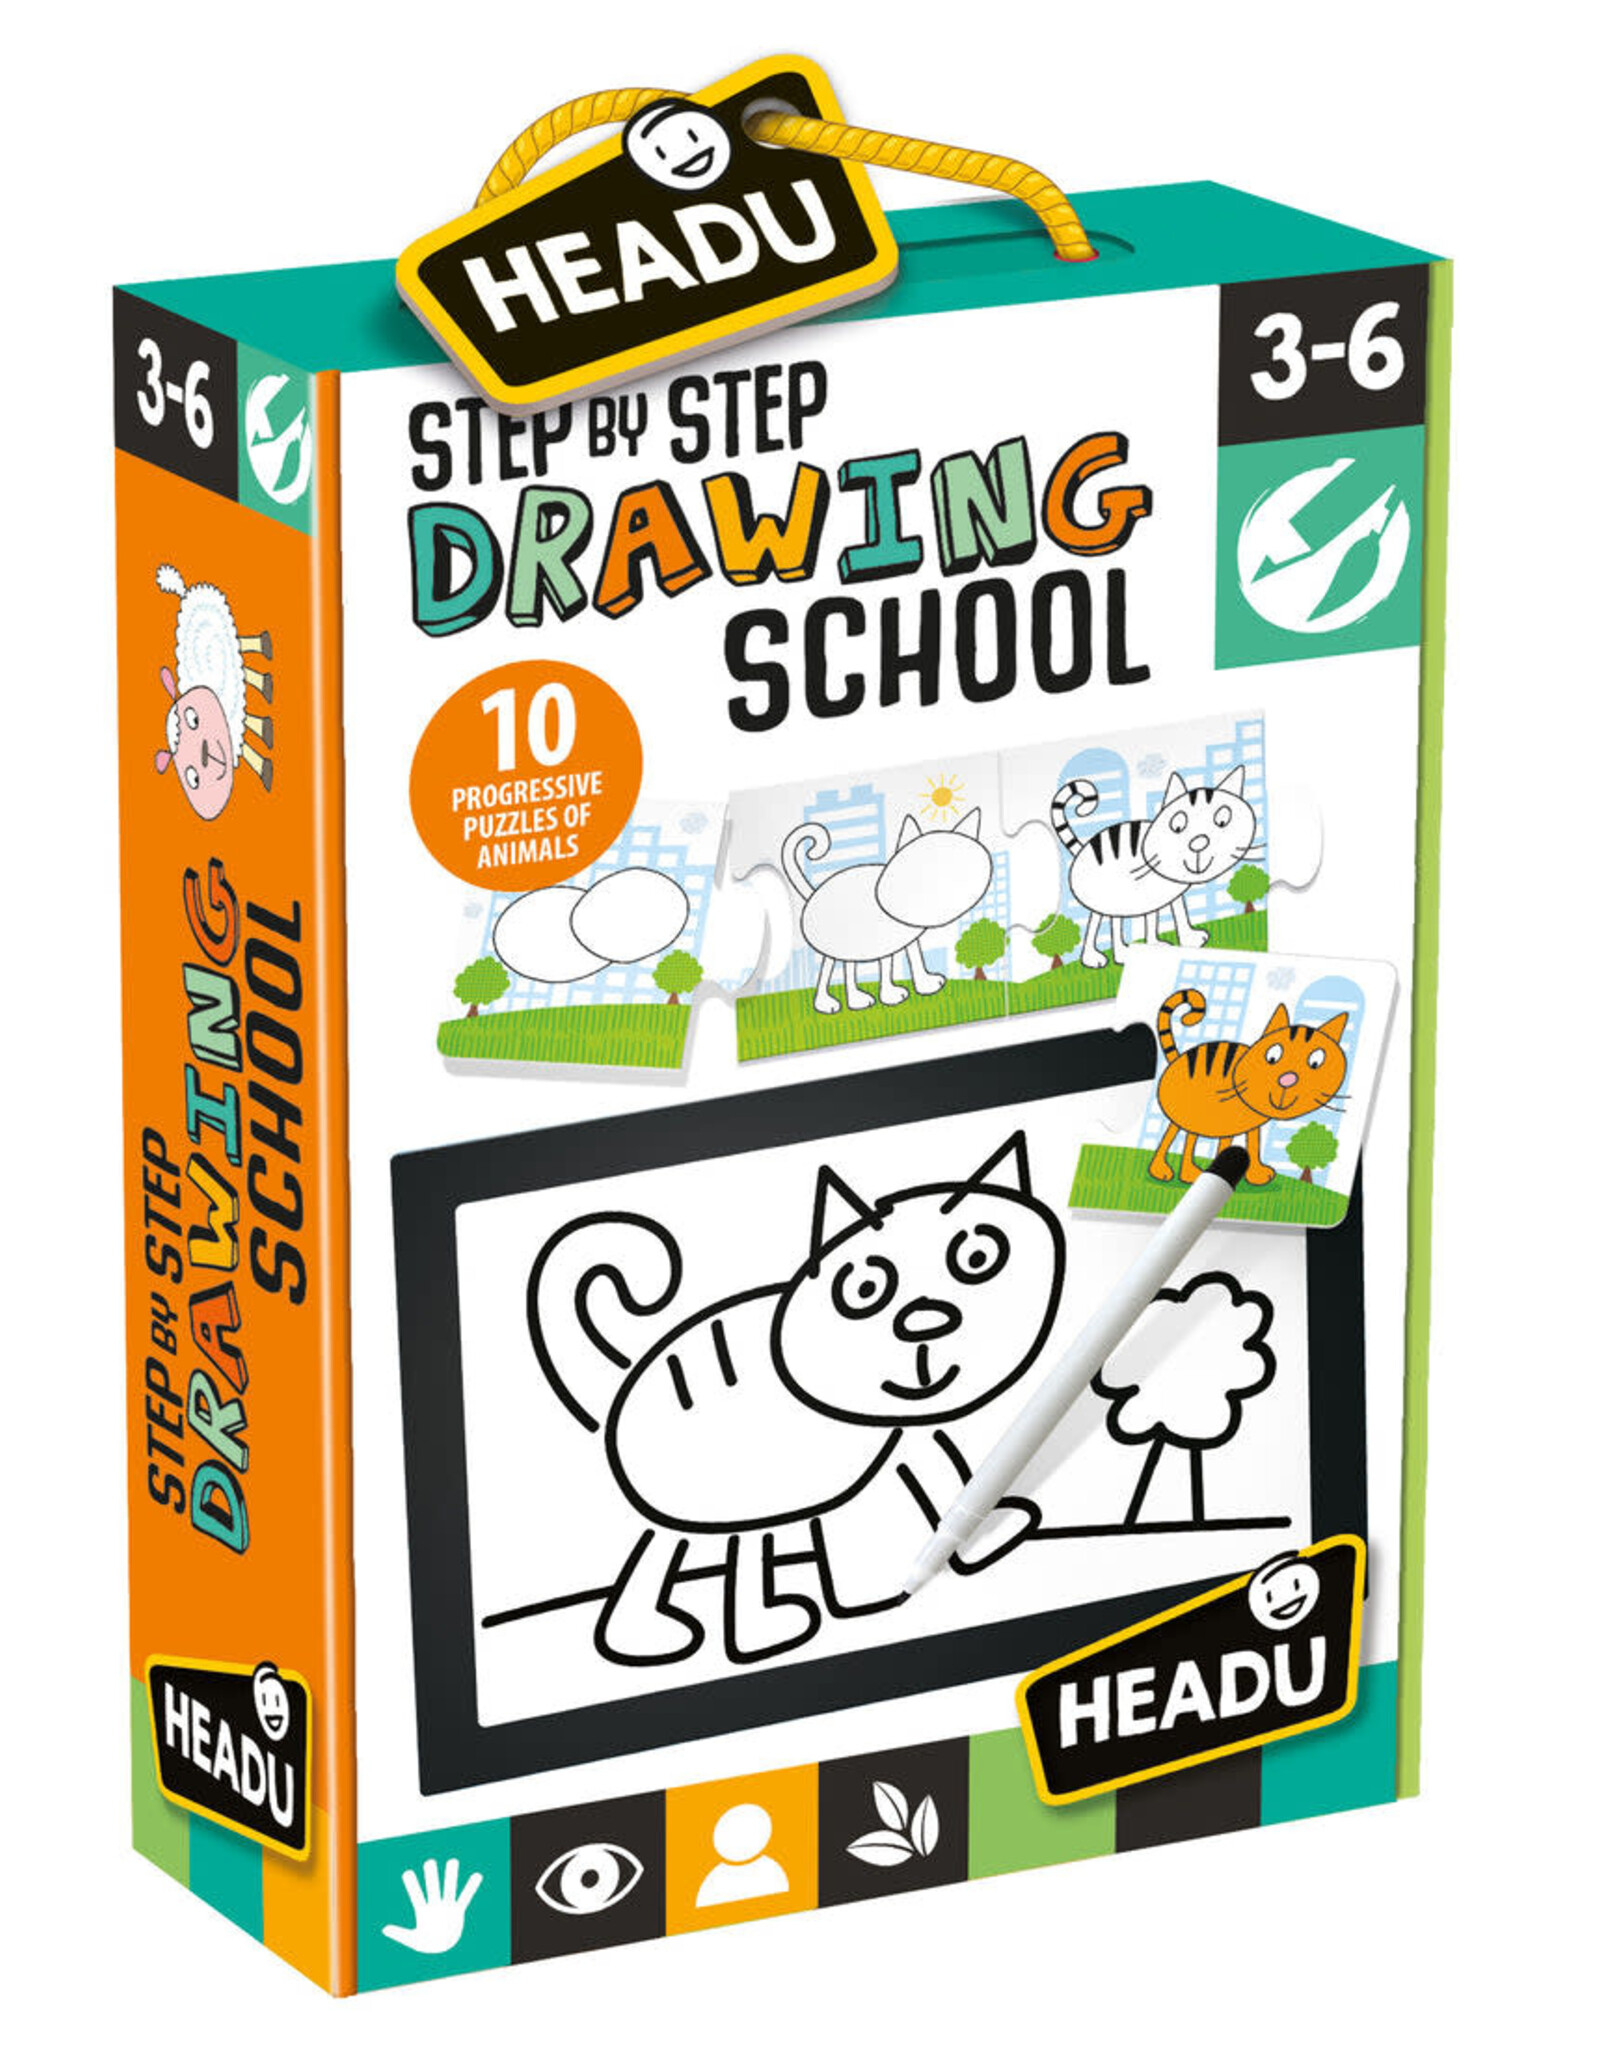 Step by Step Drawing School